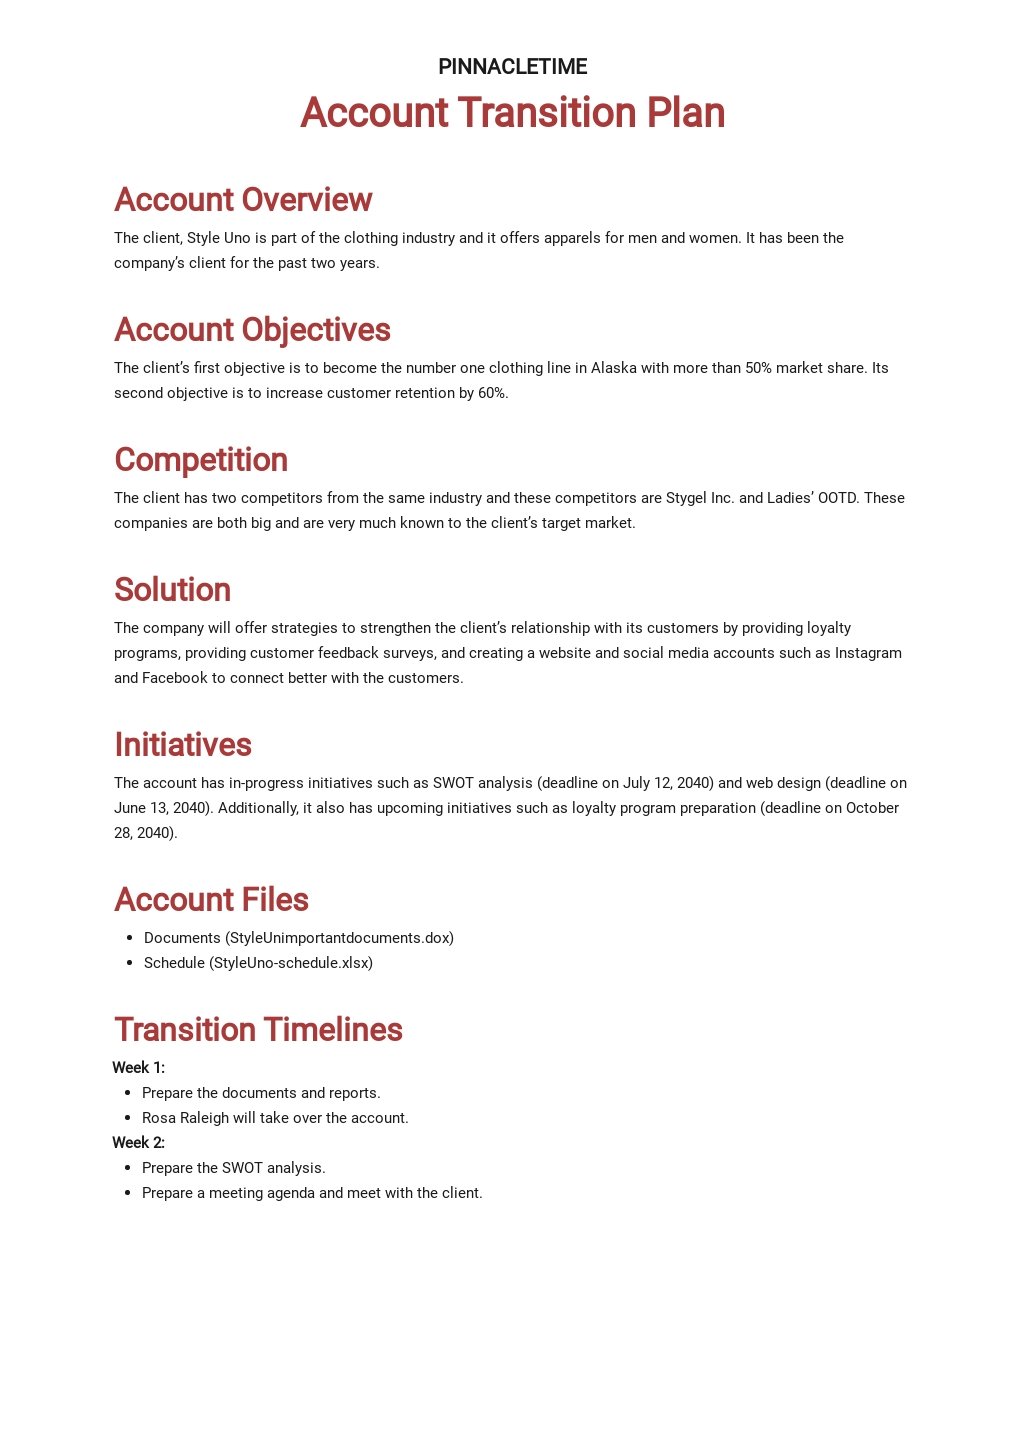 Account Transition Plan Template.jpe